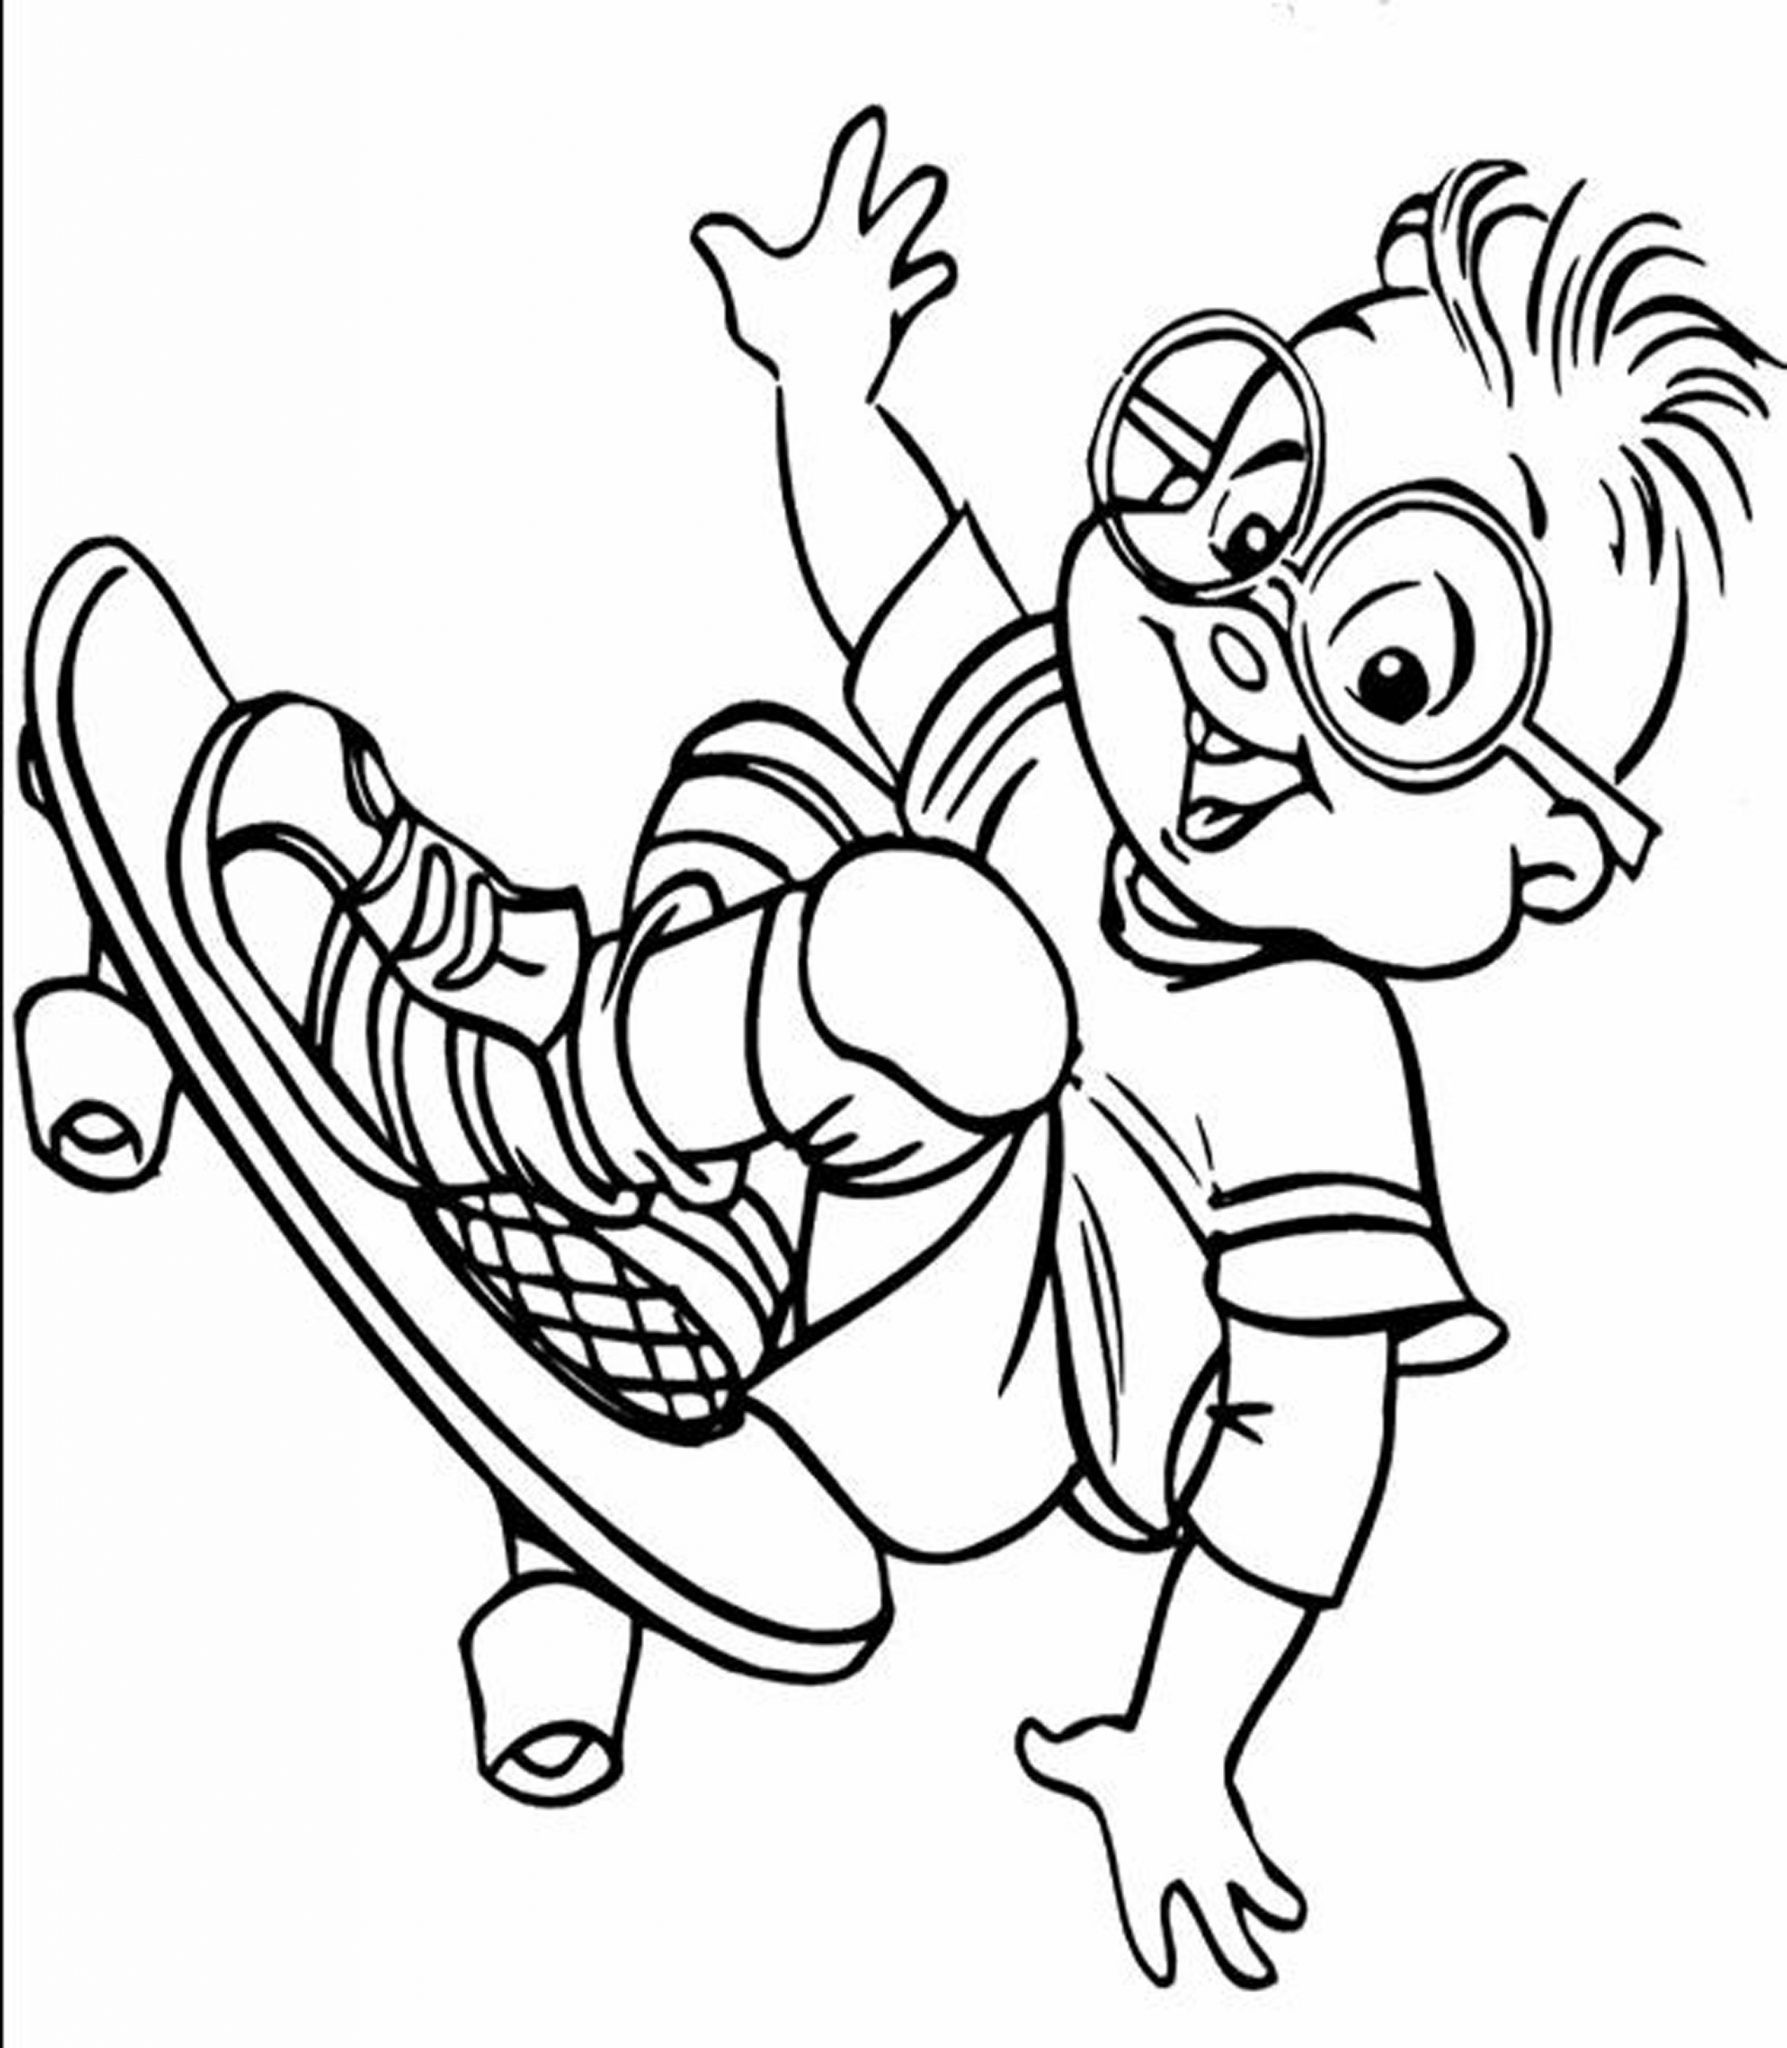 Boys Coloring Sheets
 Coloring Pages for Boys & Training Shopping For Children